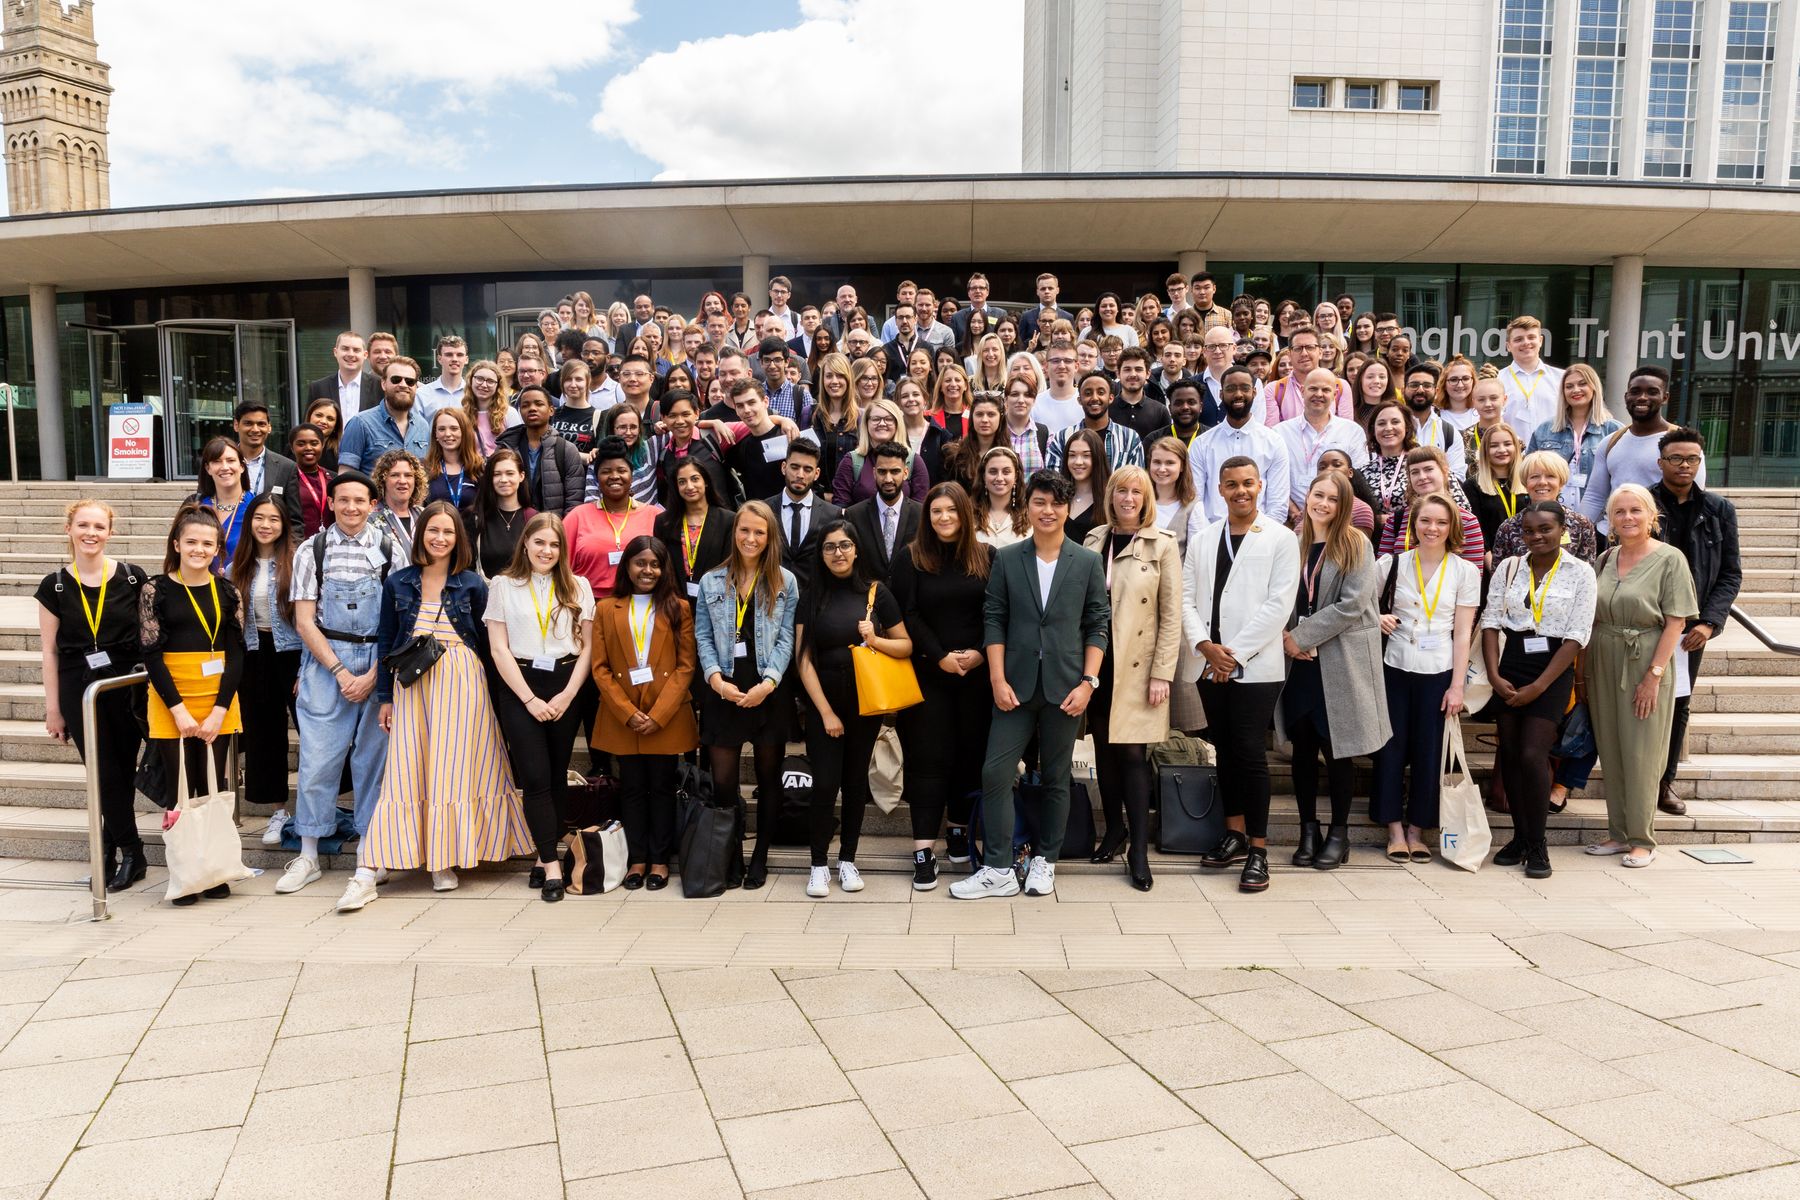 Students celebrate their success at Grads4Nottm 2019